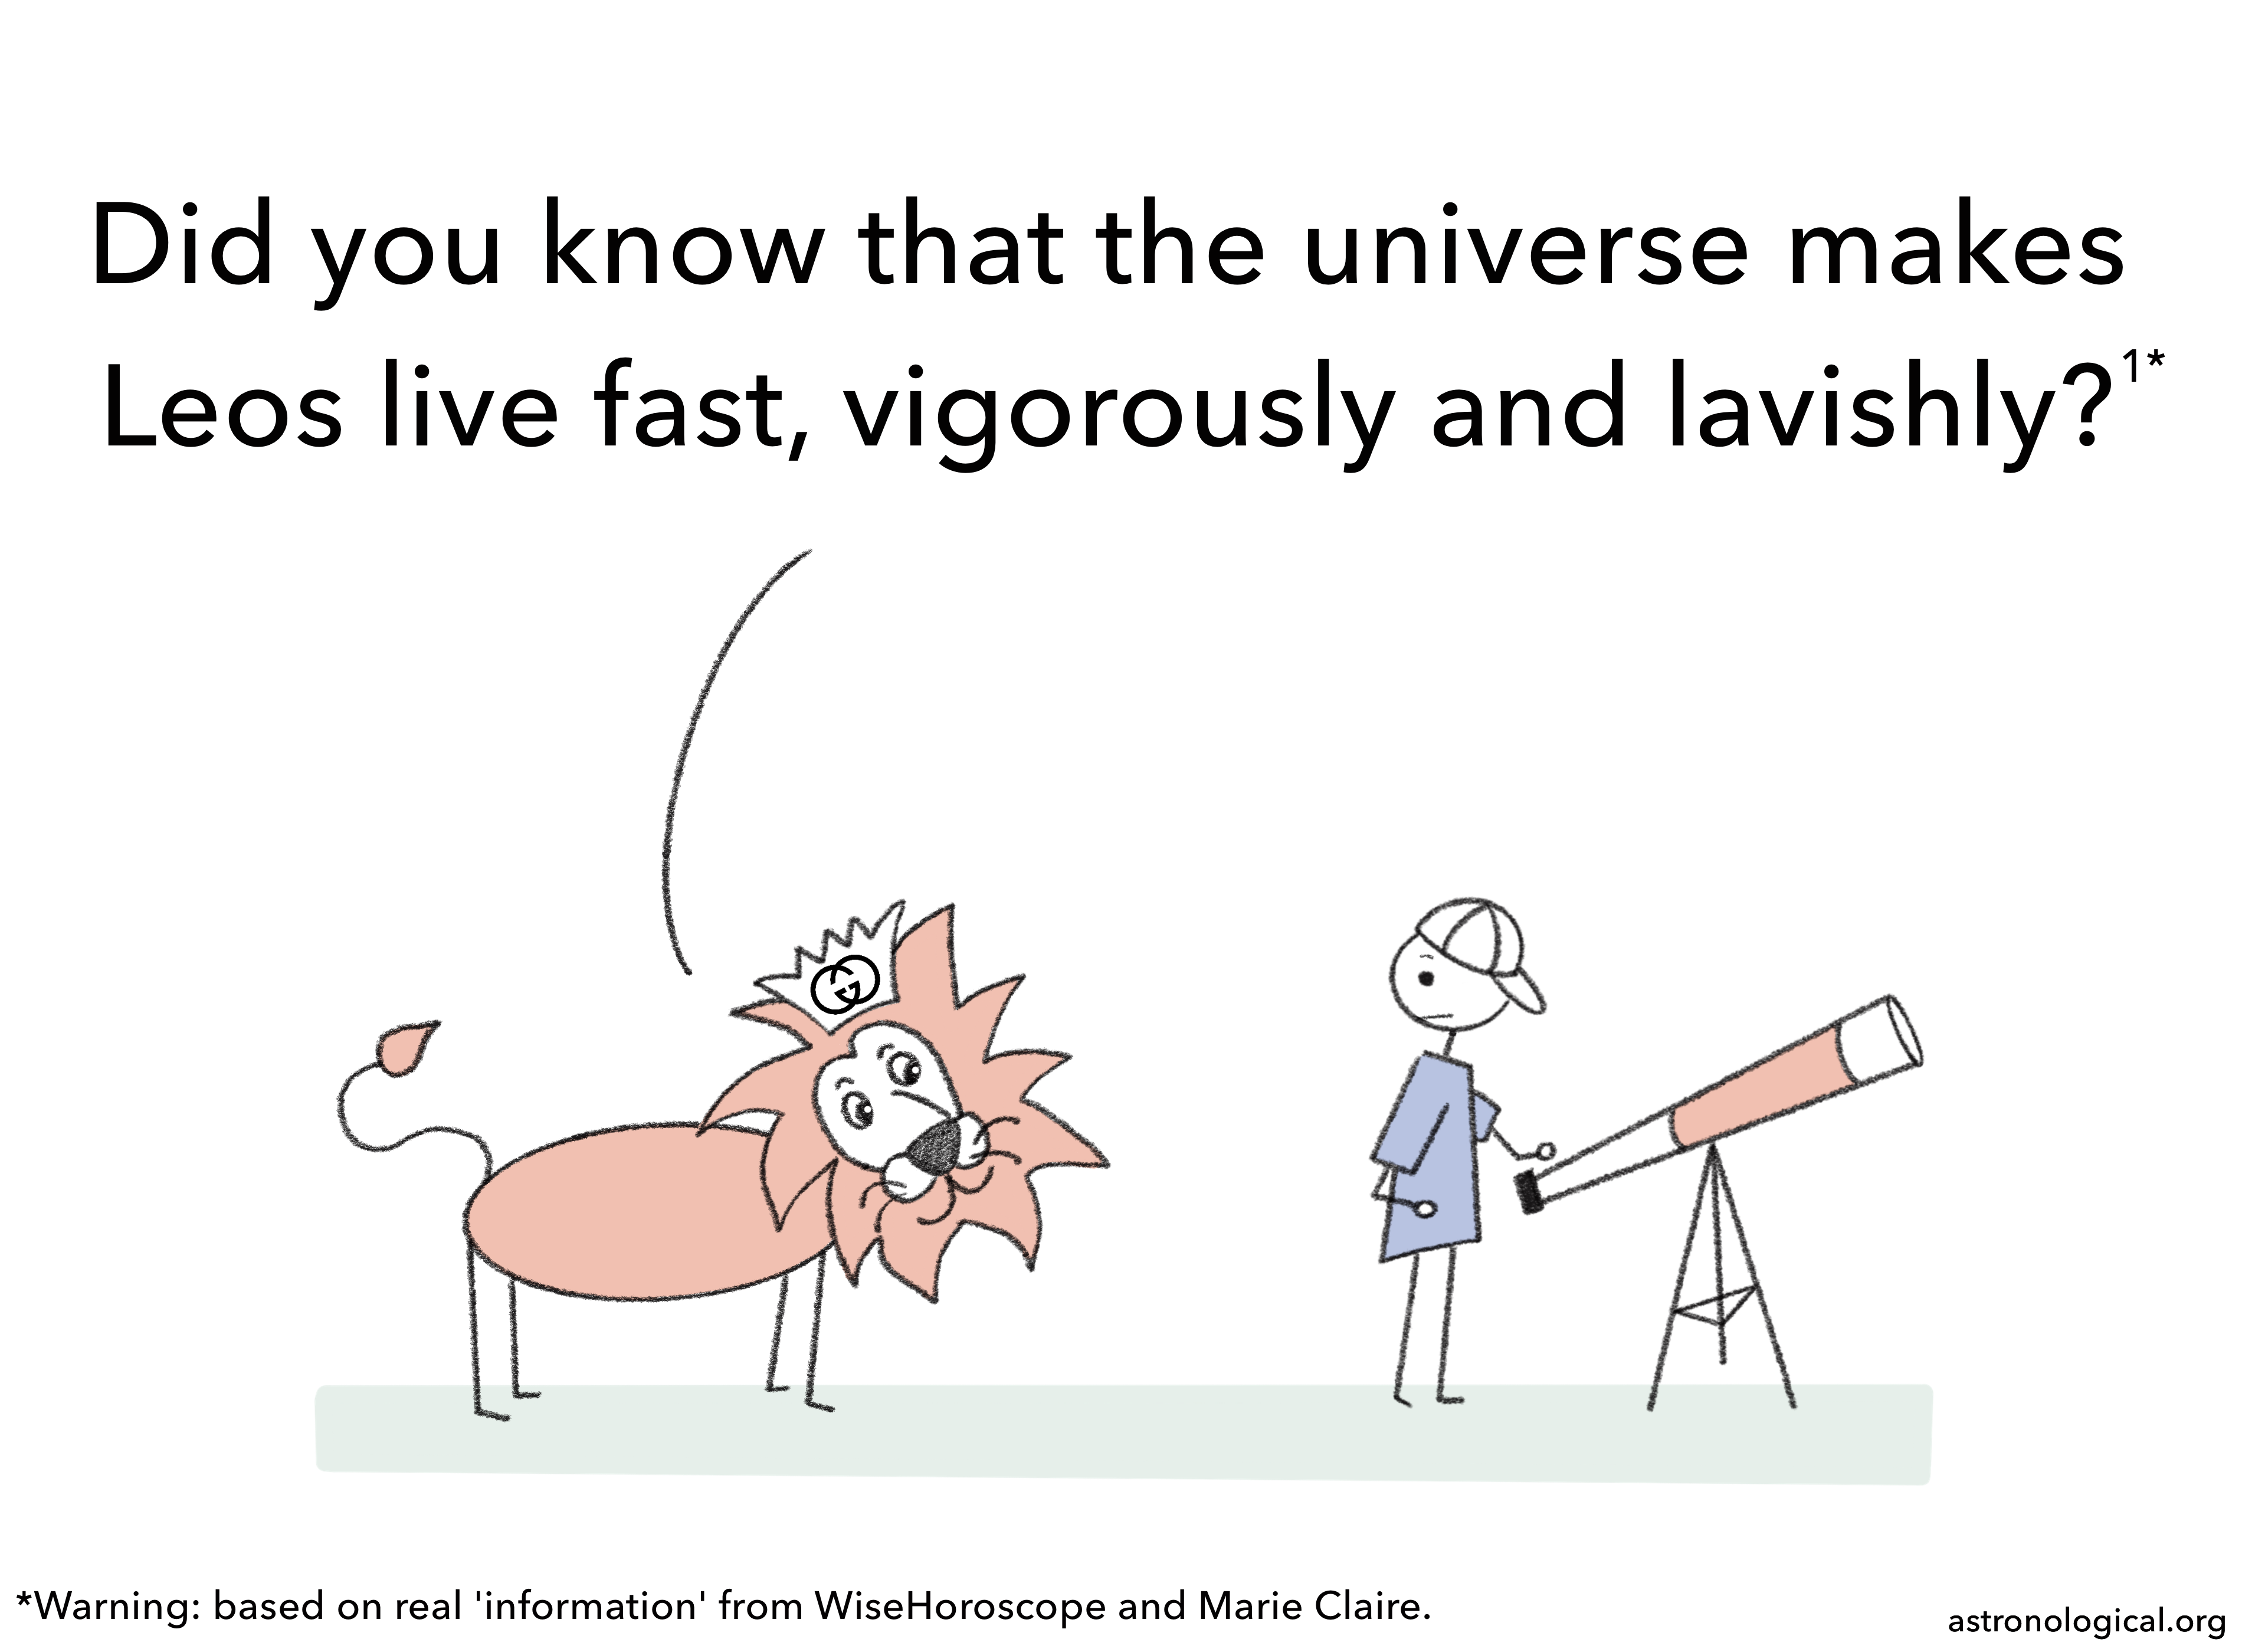 This panel has an asterisk that says: Warning: based on real information from WiseHoroscope and Marie Claire. A cartoon lion wearing a crown with a Gucci logo is talking to a stick figure scientist who is standing at a telescope. The lion says: Did you know that the universe makes Leos live fast, vigorously and lavishly?